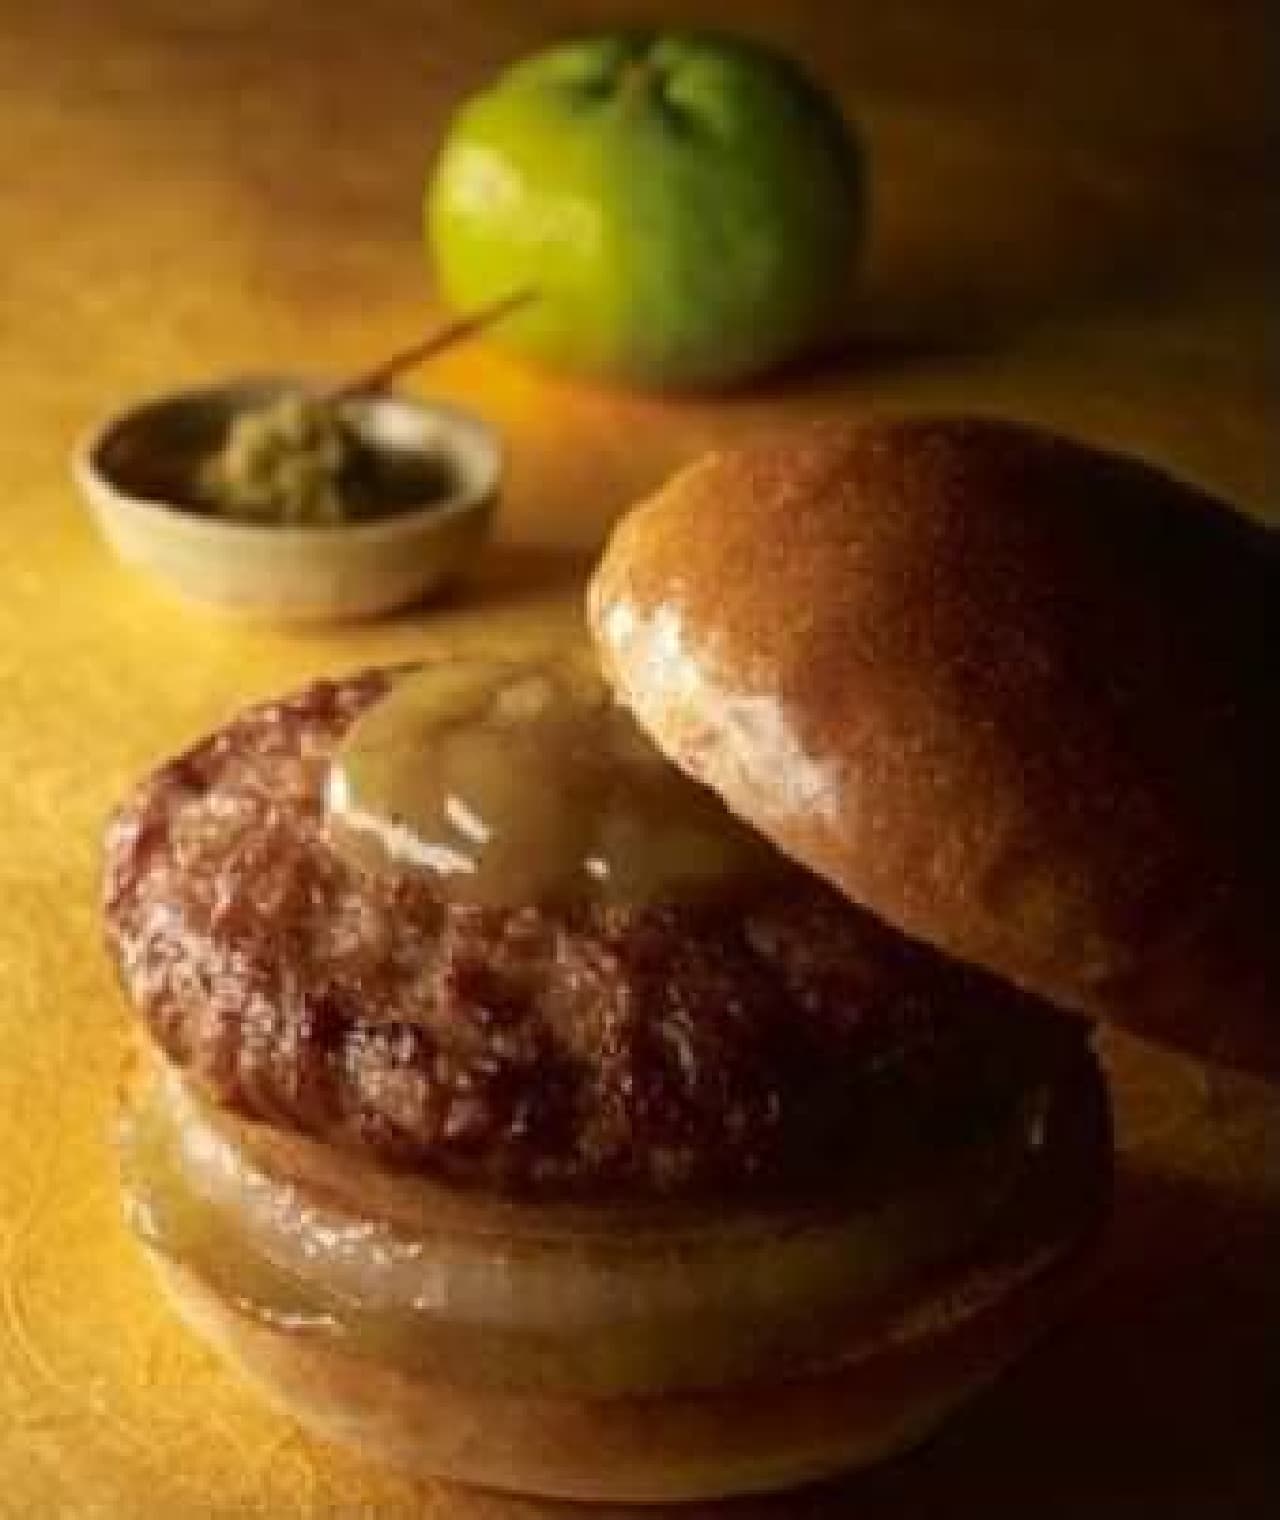 Melting patties with a refreshing yuzu pepper sauce